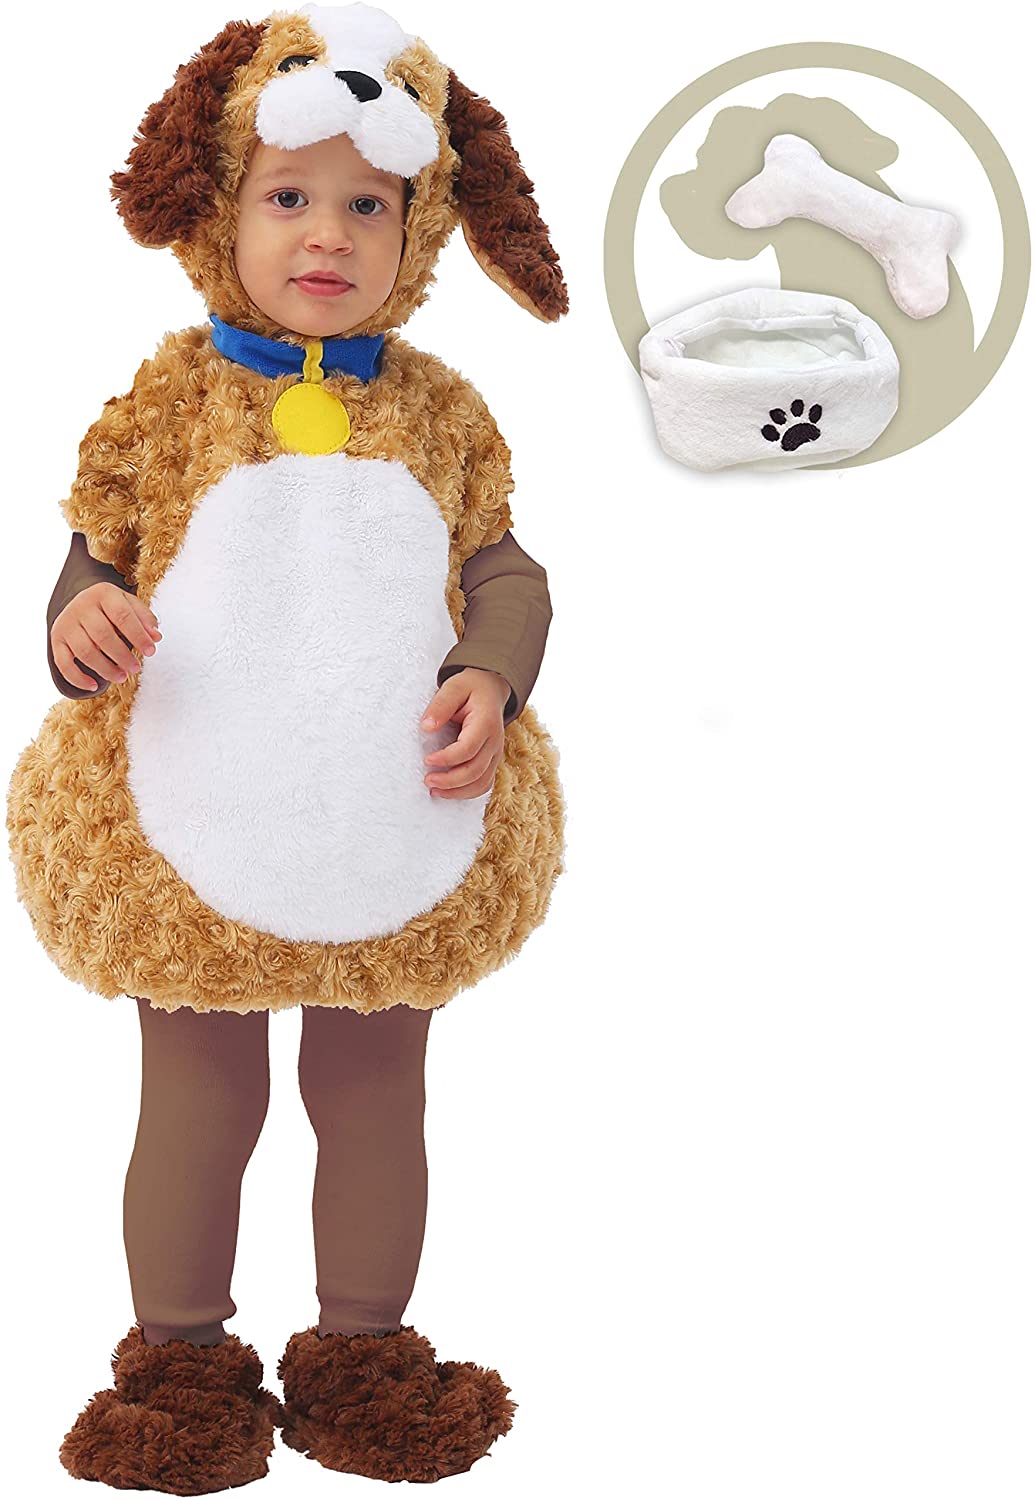 Spooktacular Creations Baby Puppy Costume (3T (86 -102 cm)) RRP 24.99 CLEARANCE XL 14.99